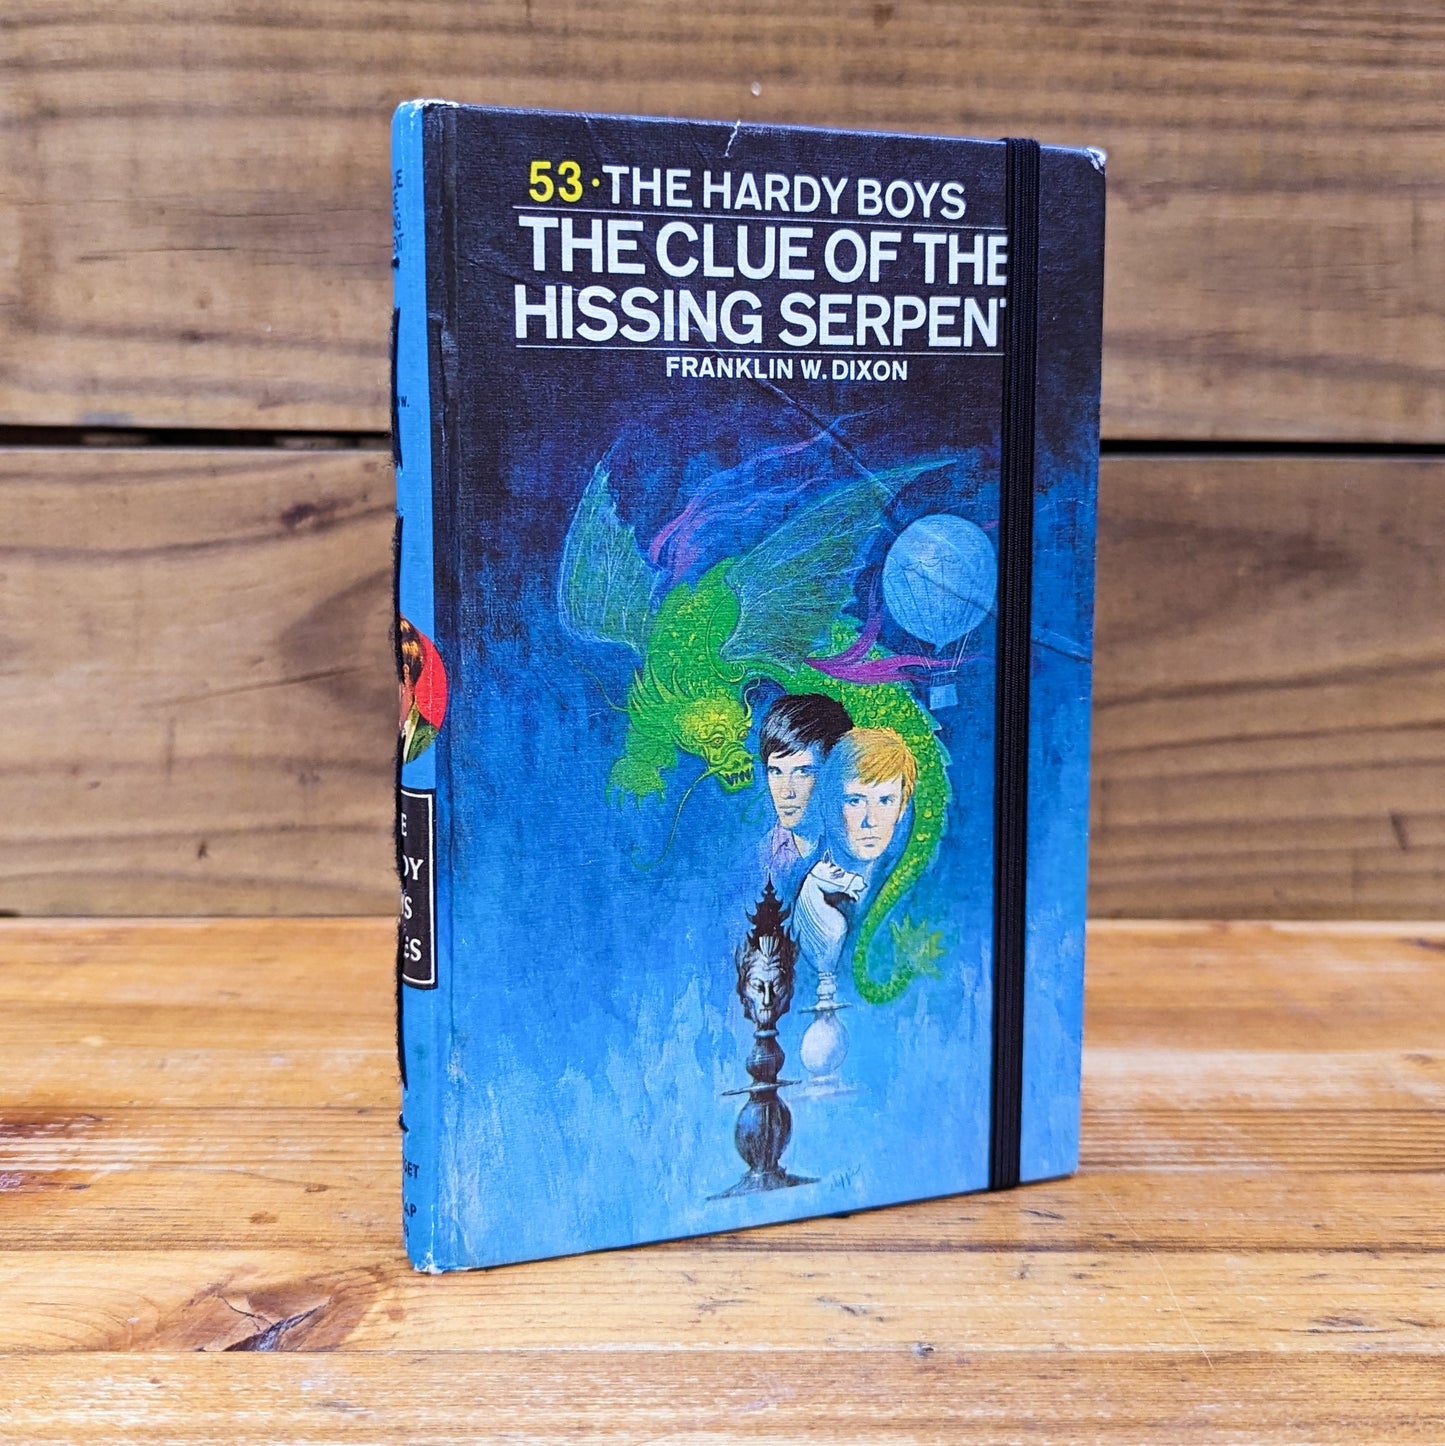 HARDY BOYS: THE CLUE OF THE HISSING SERPENT